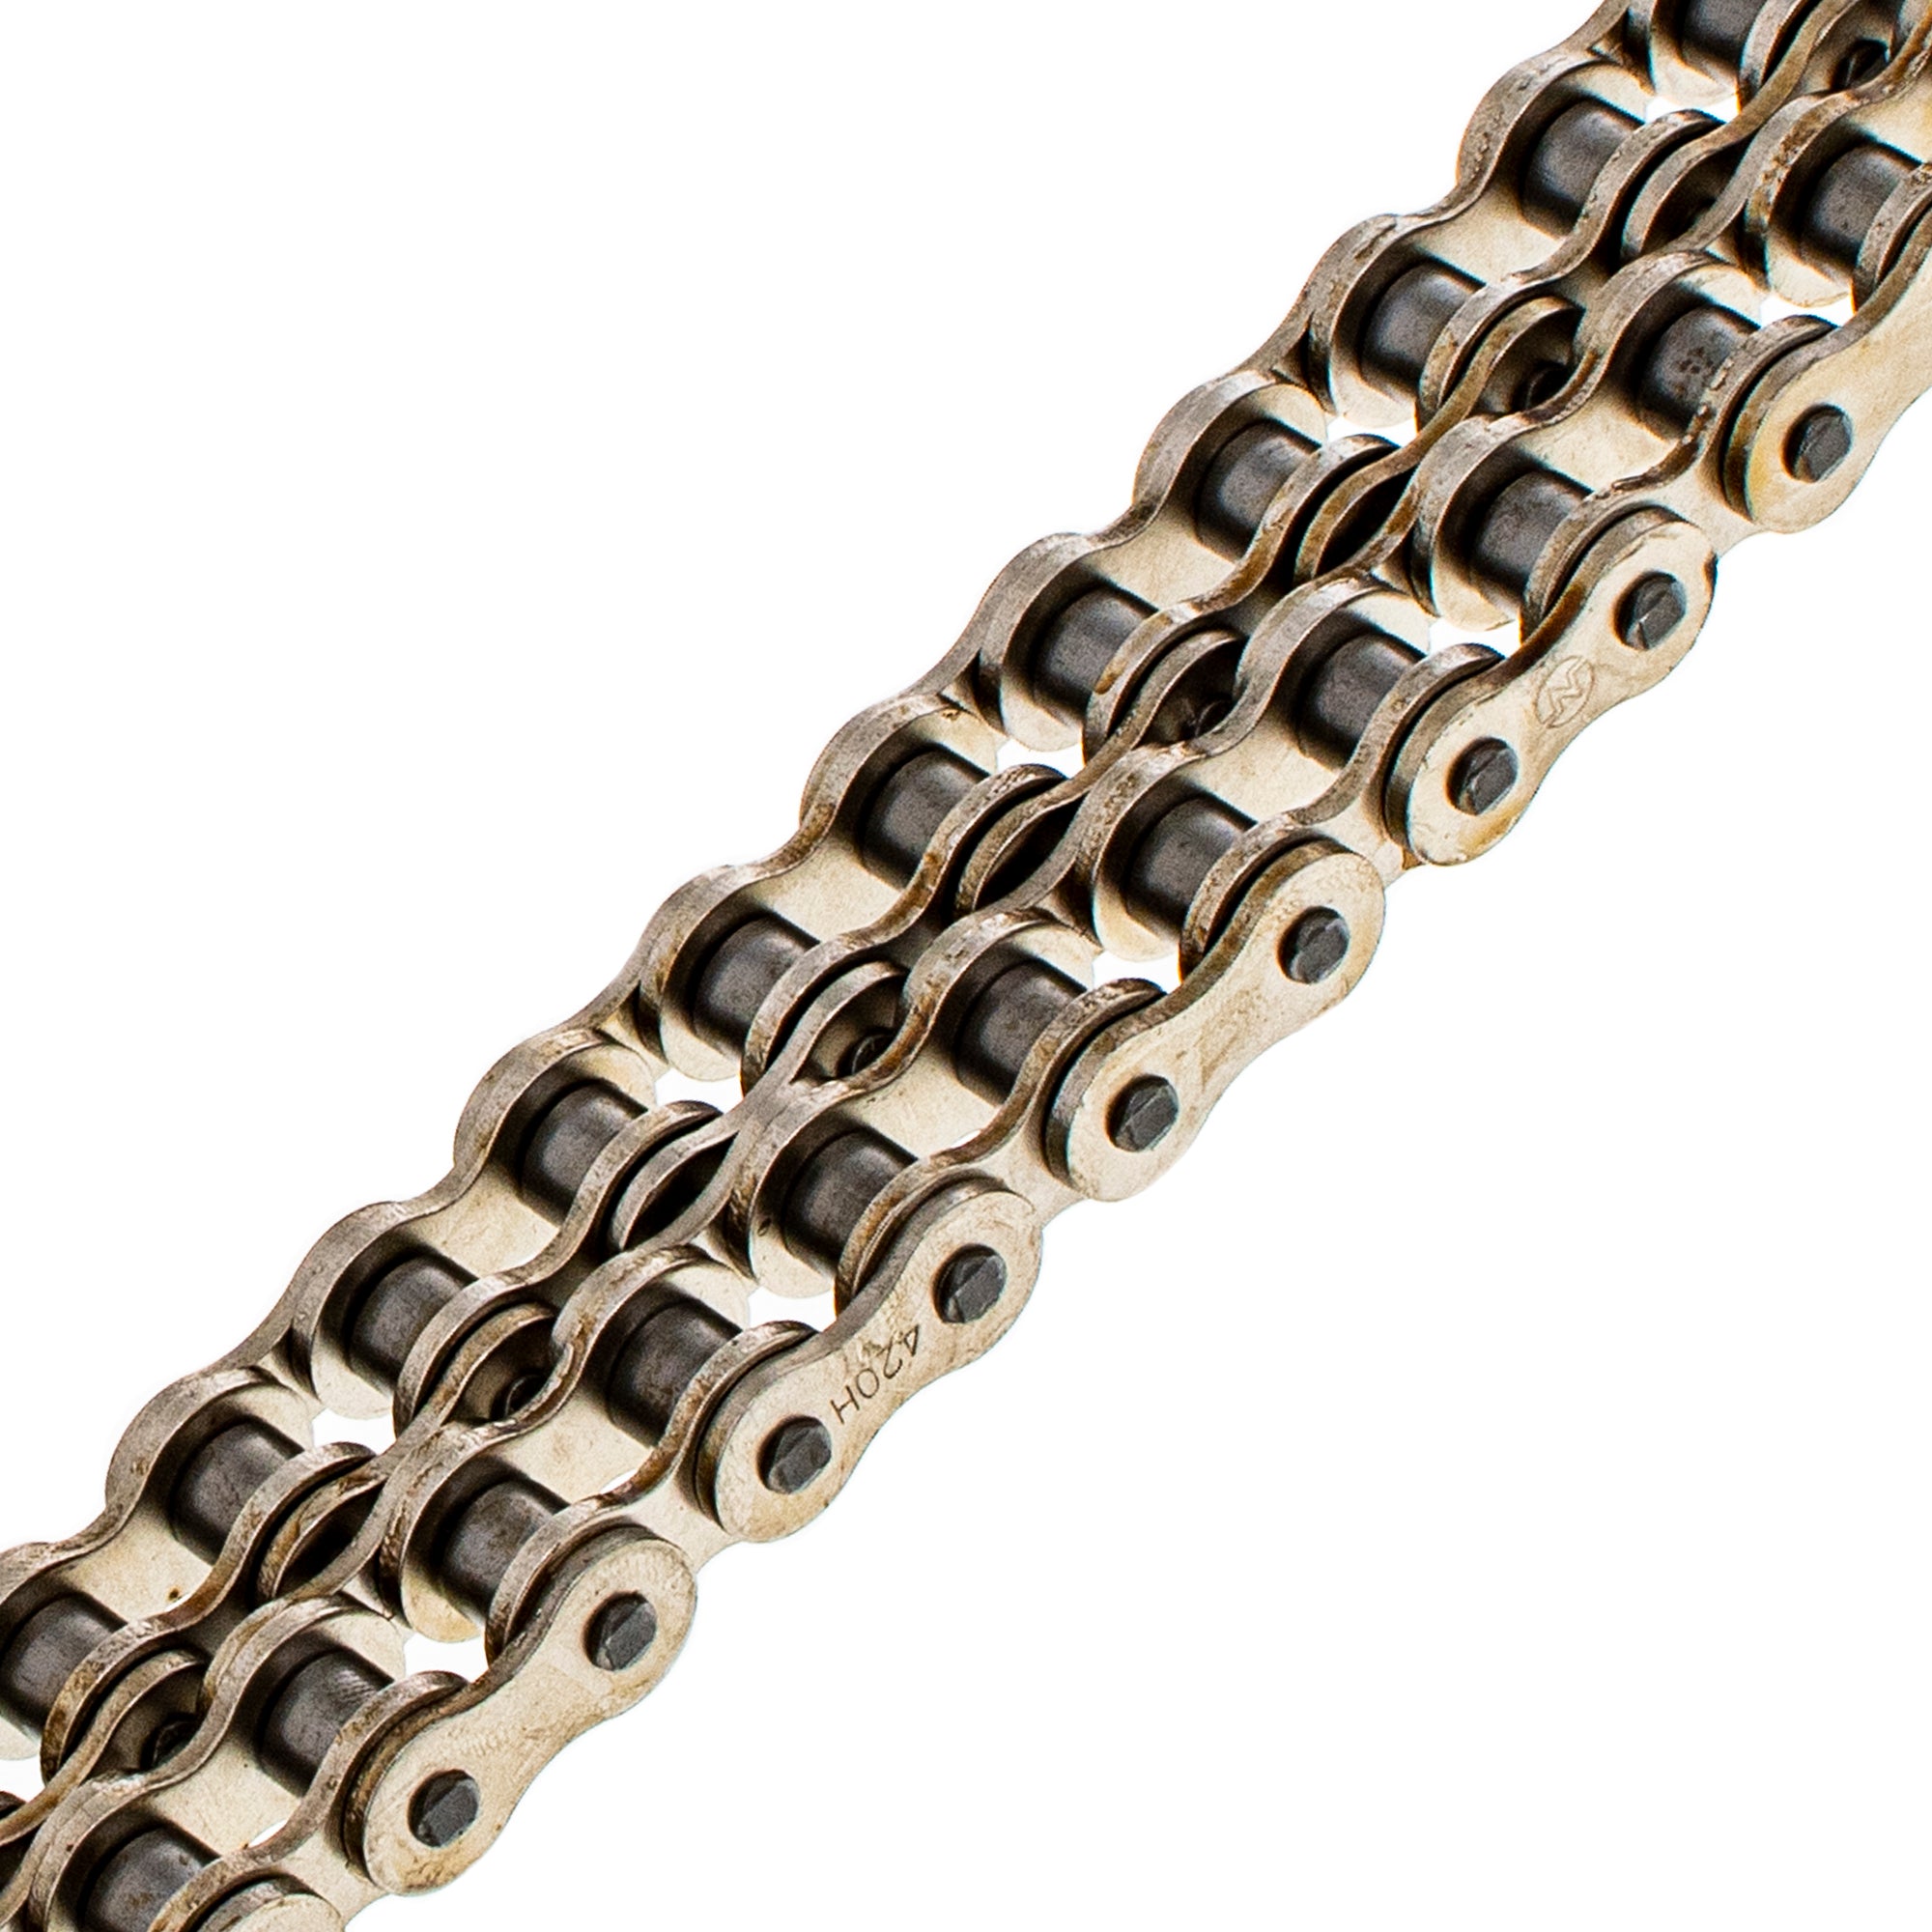 Drive Chain 98 Standard Non O-Ring w/ Master Link for zOTHER Honda YZ60 OR50 Monkey DR50 NICHE 519-CDC2218H